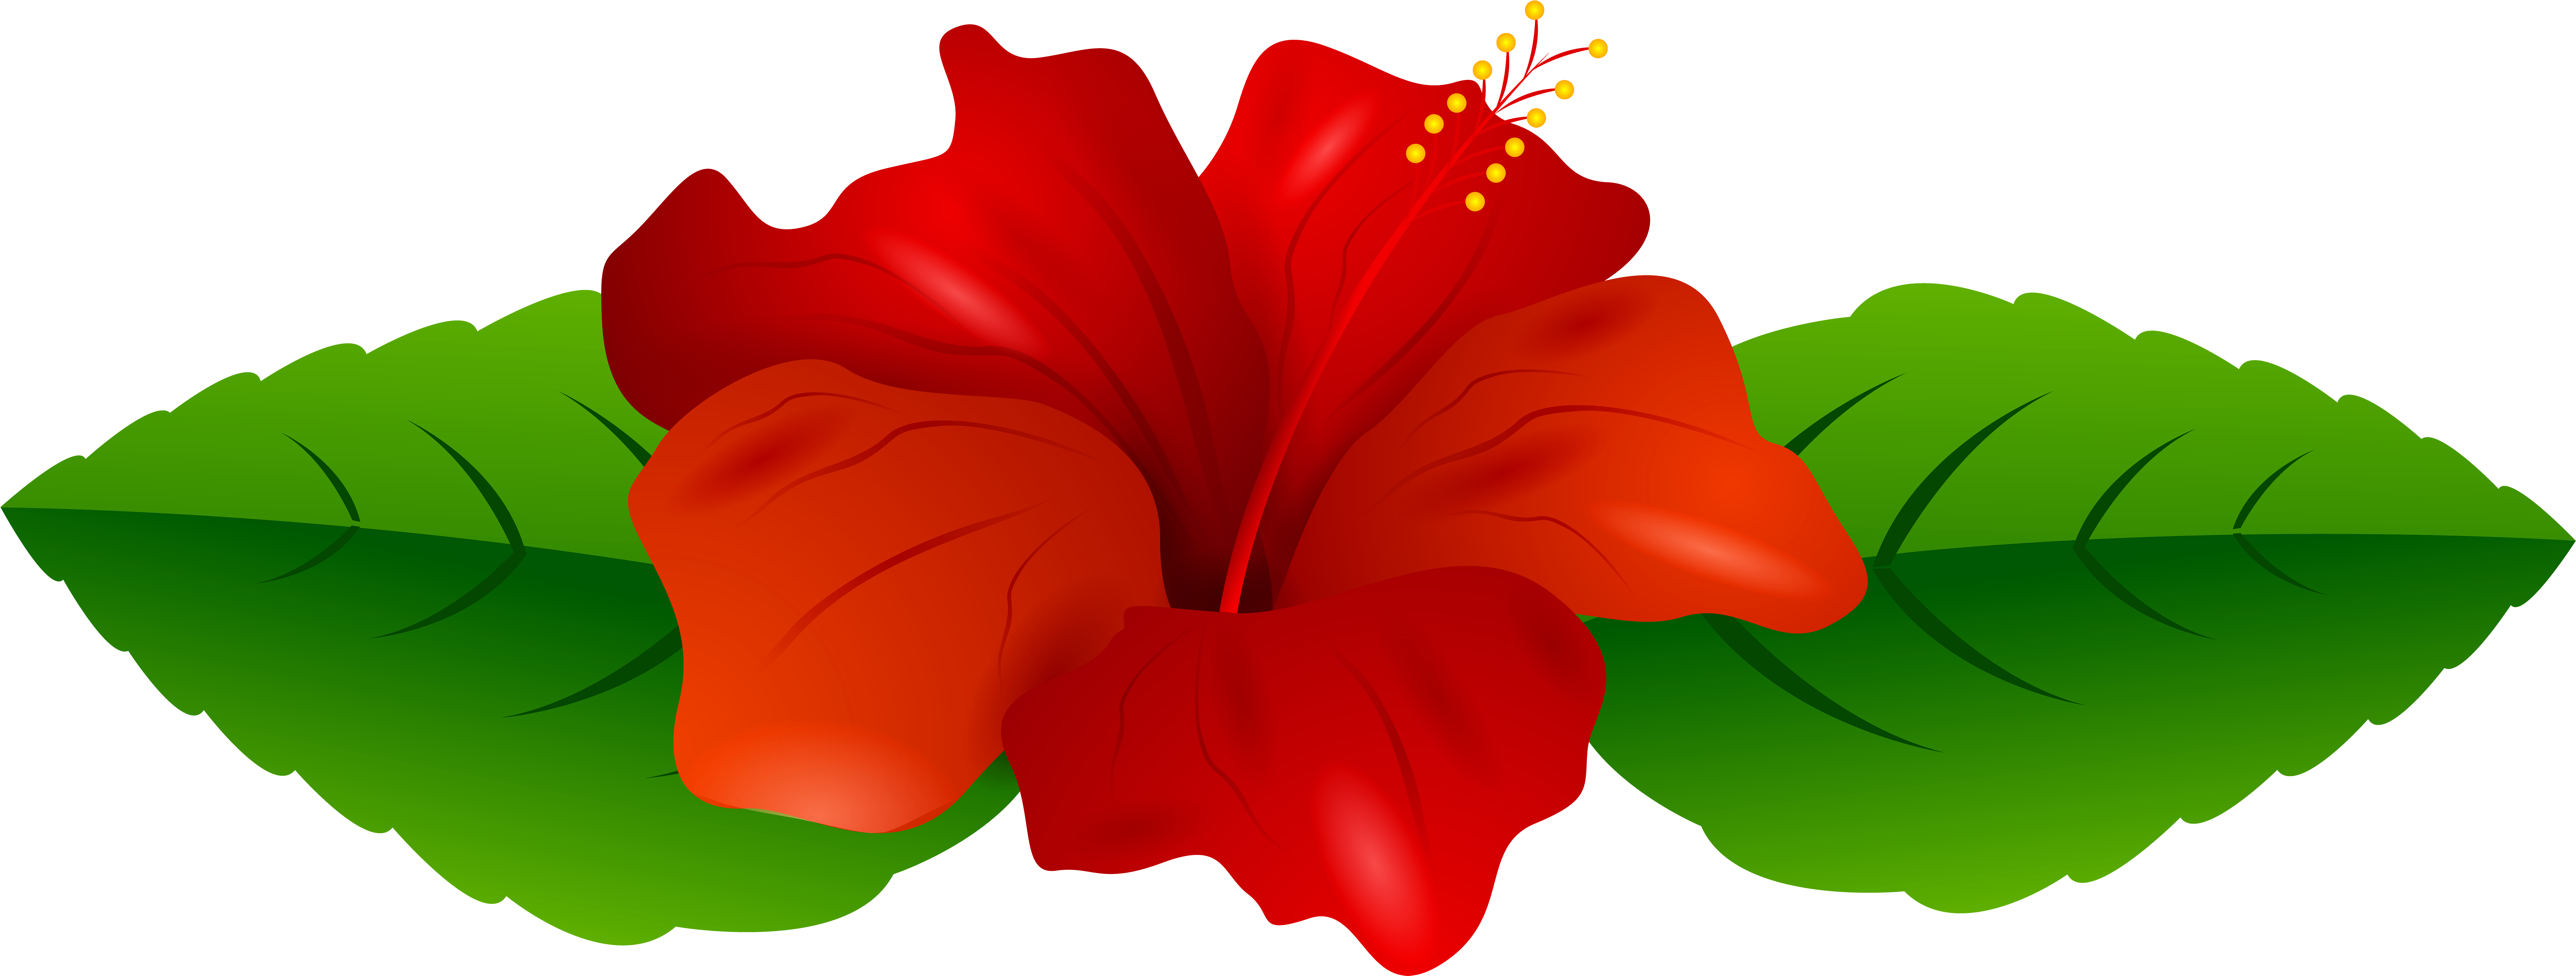 Hibiscus Flower Silhouette PNG